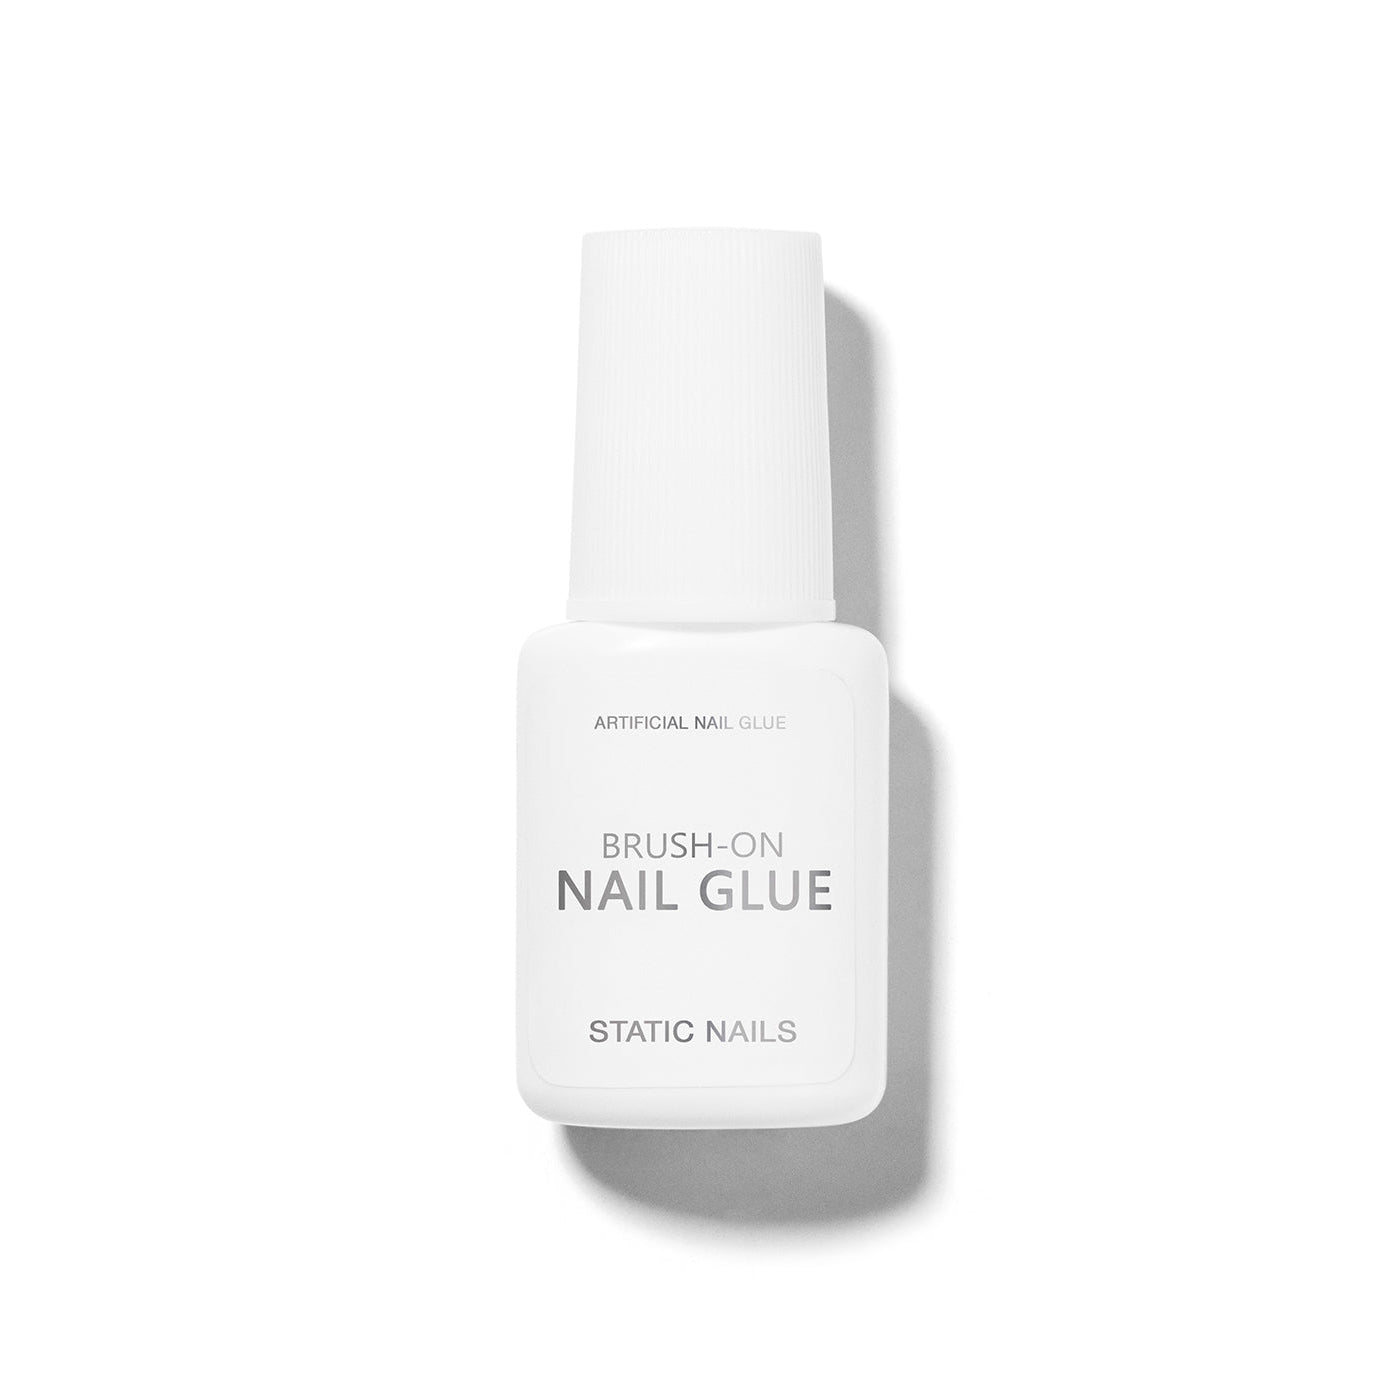 Looks United Yuanine Liquid Super Brush On Nail Glue For Nail Art 10g. -  Price in India, Buy Looks United Yuanine Liquid Super Brush On Nail Glue  For Nail Art 10g. Online